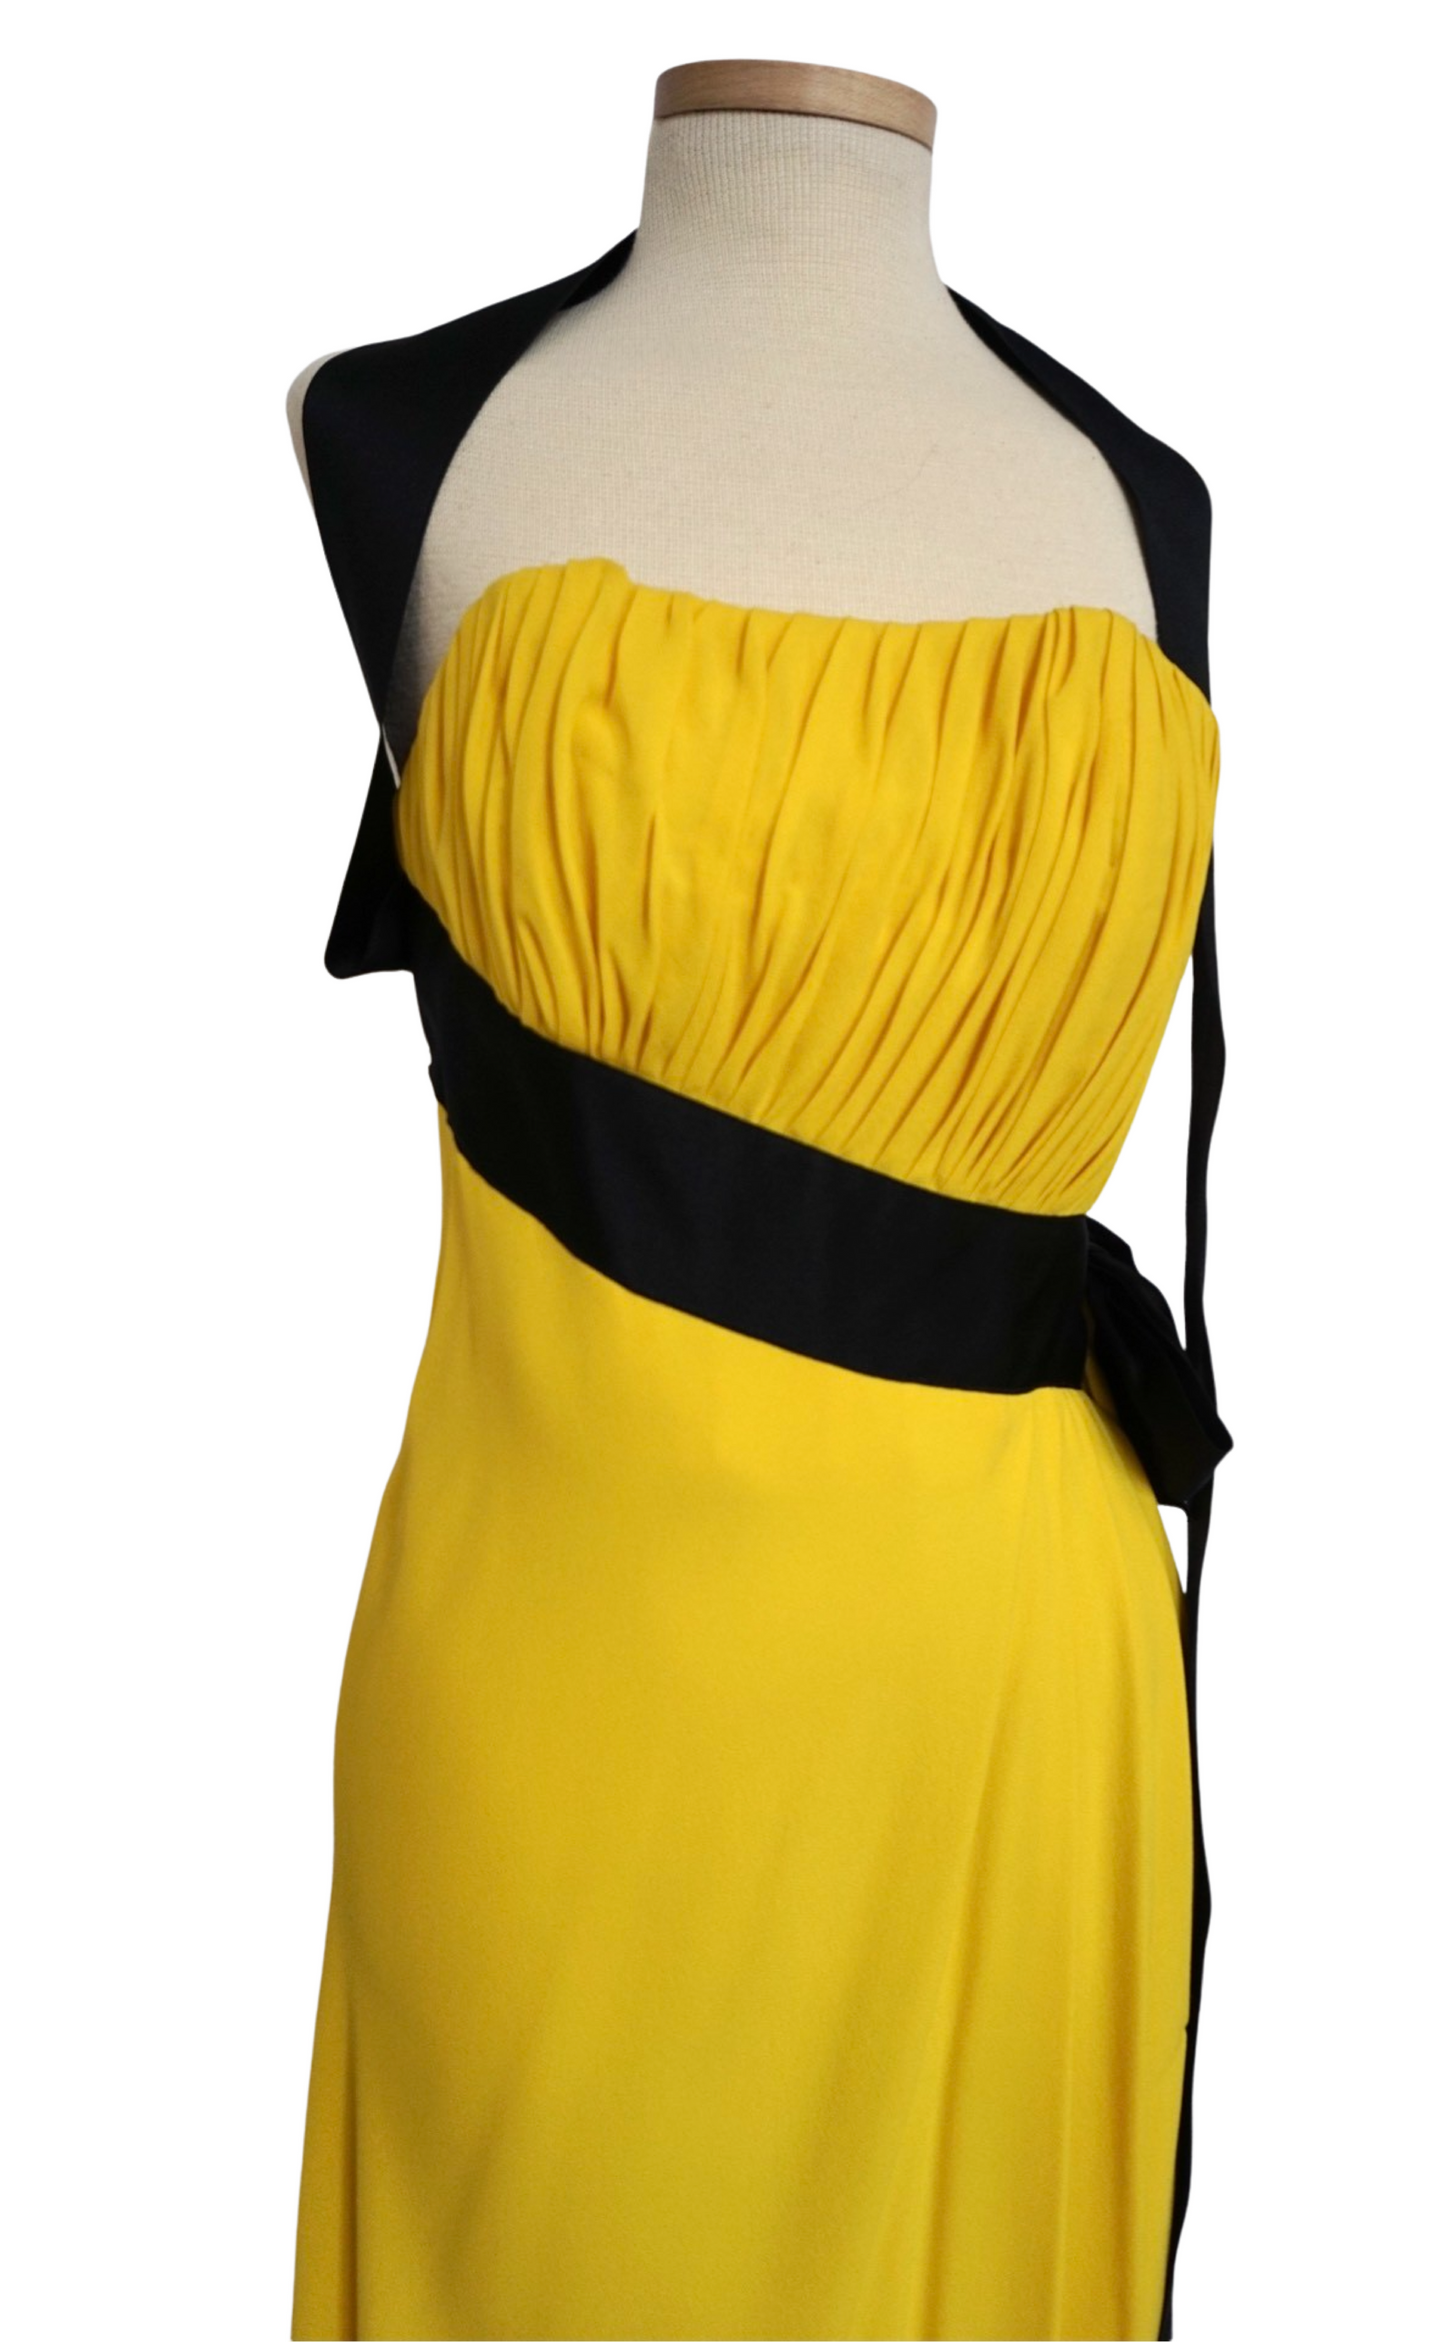 Chanel Spring 1991 Yellow Cocktail Dress with Black Bow